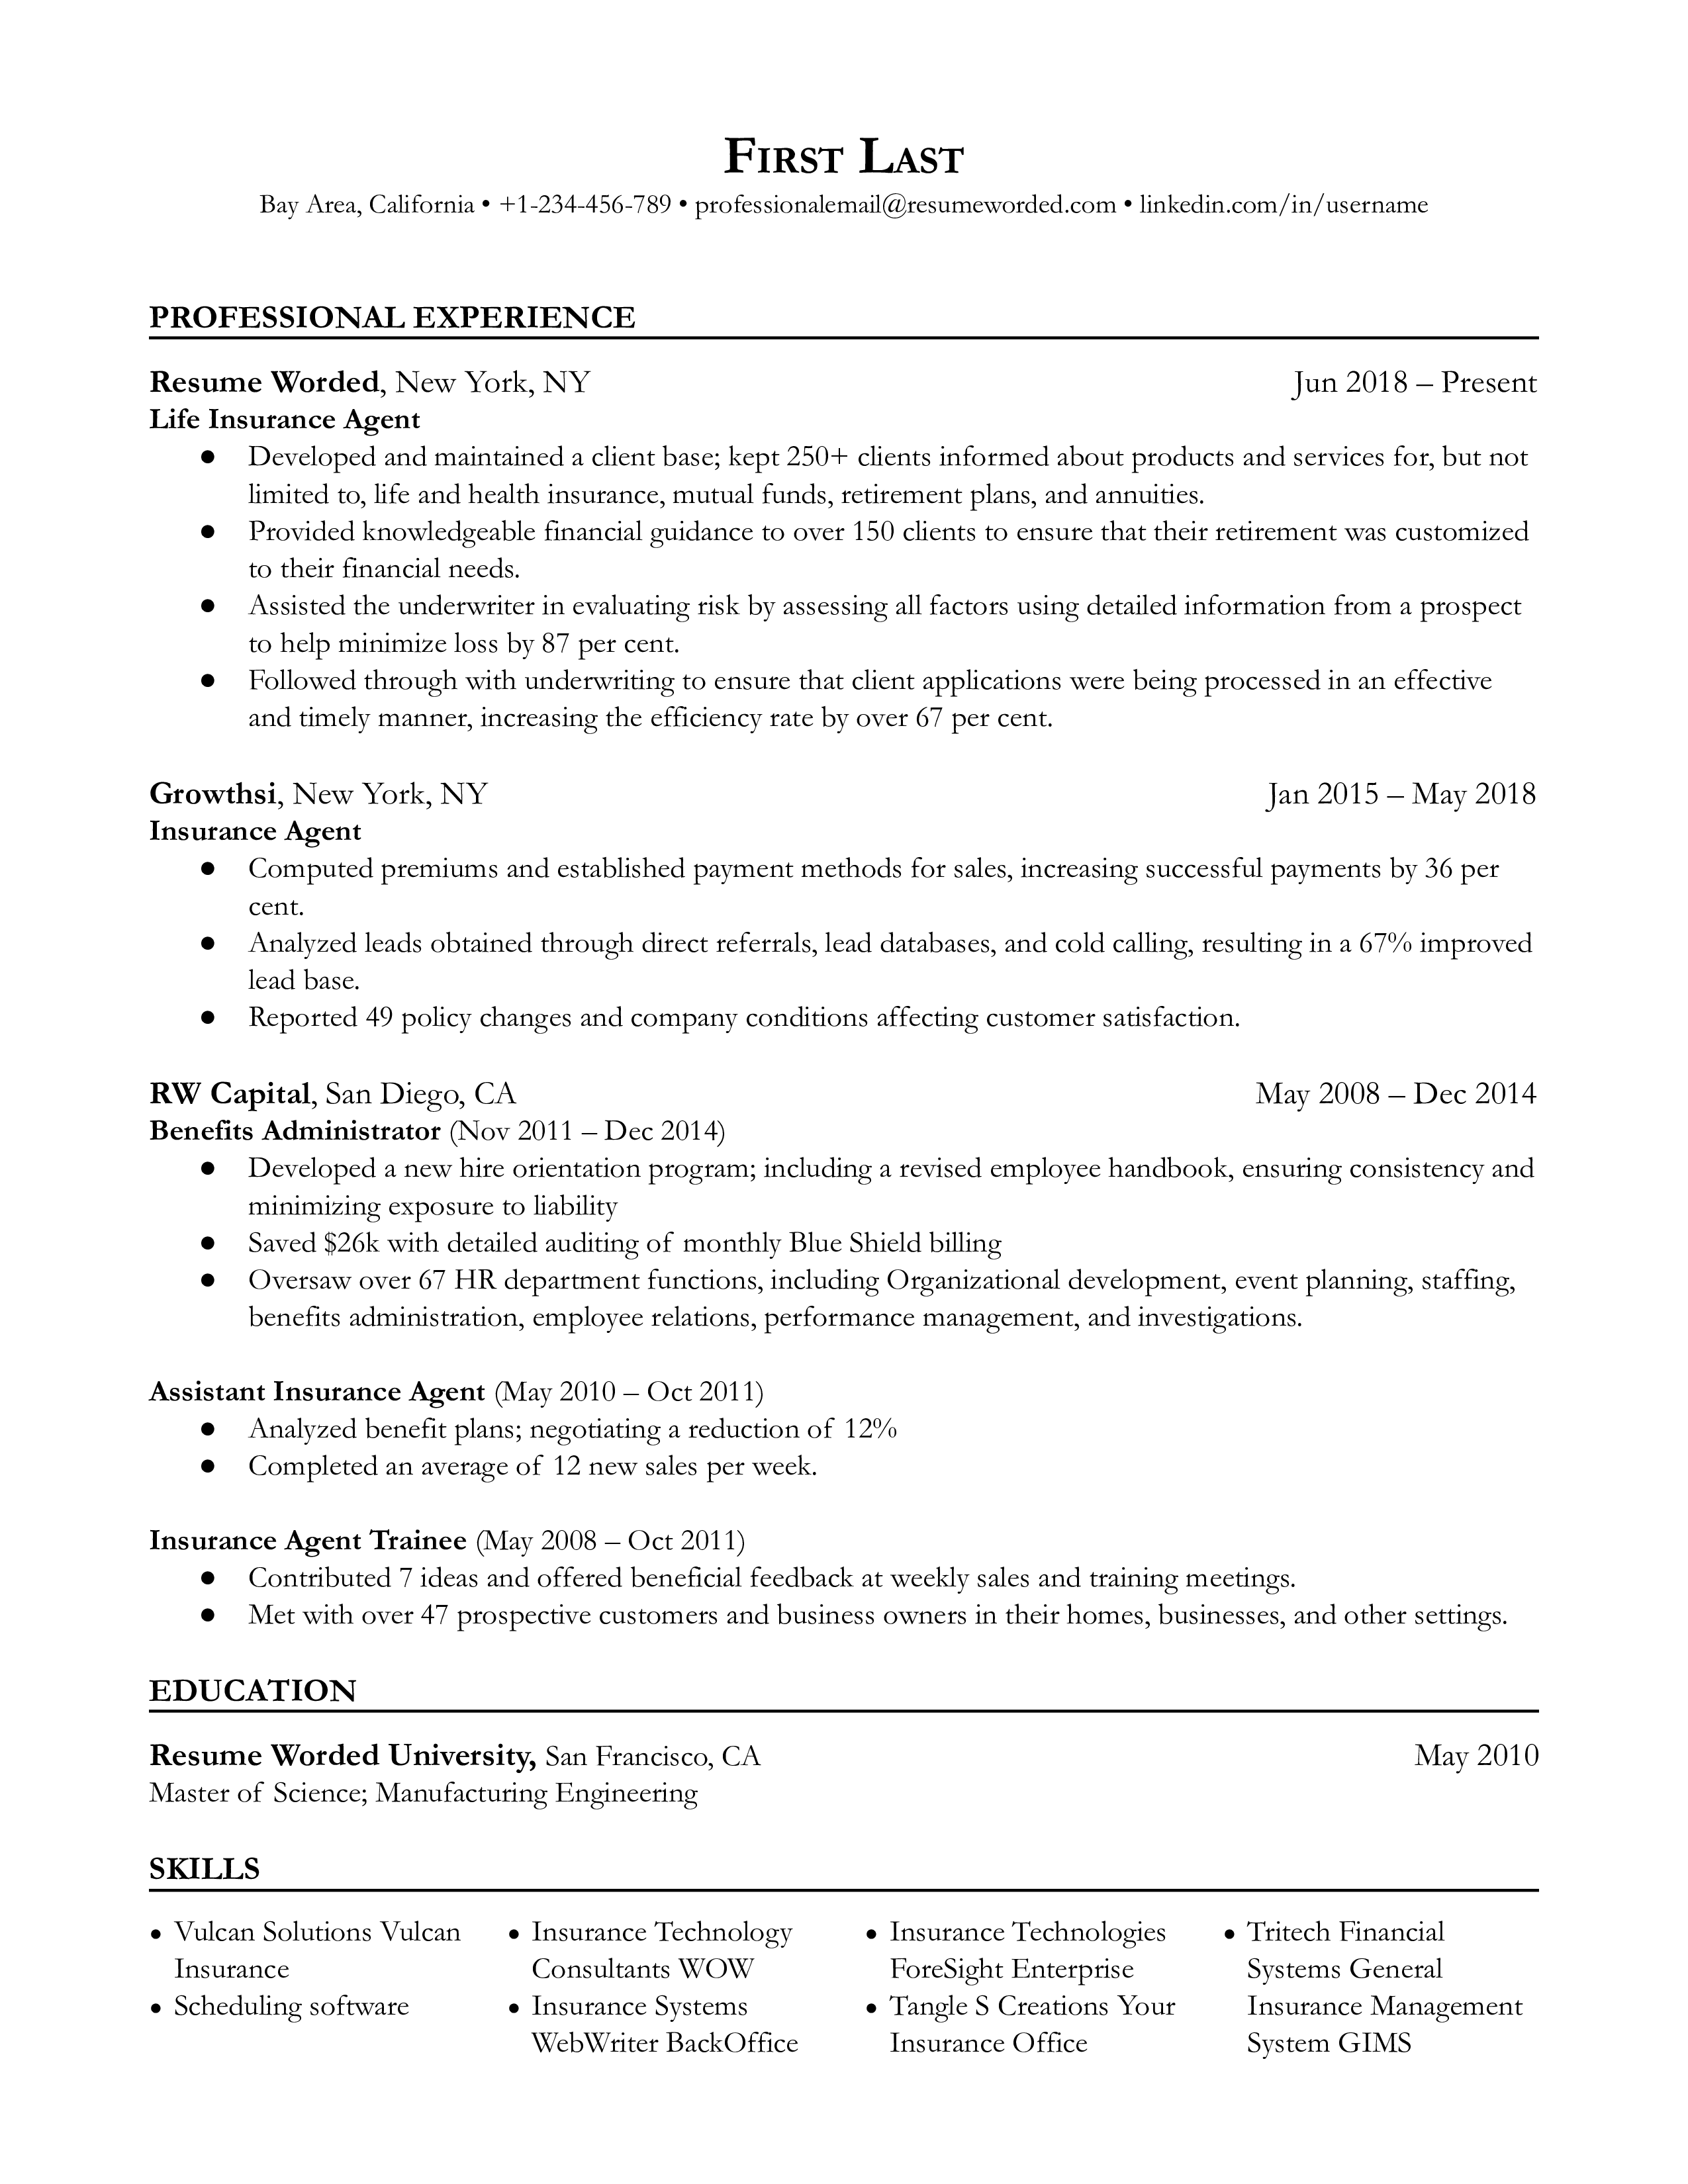 Life Insurance Agent Resume Template + Example